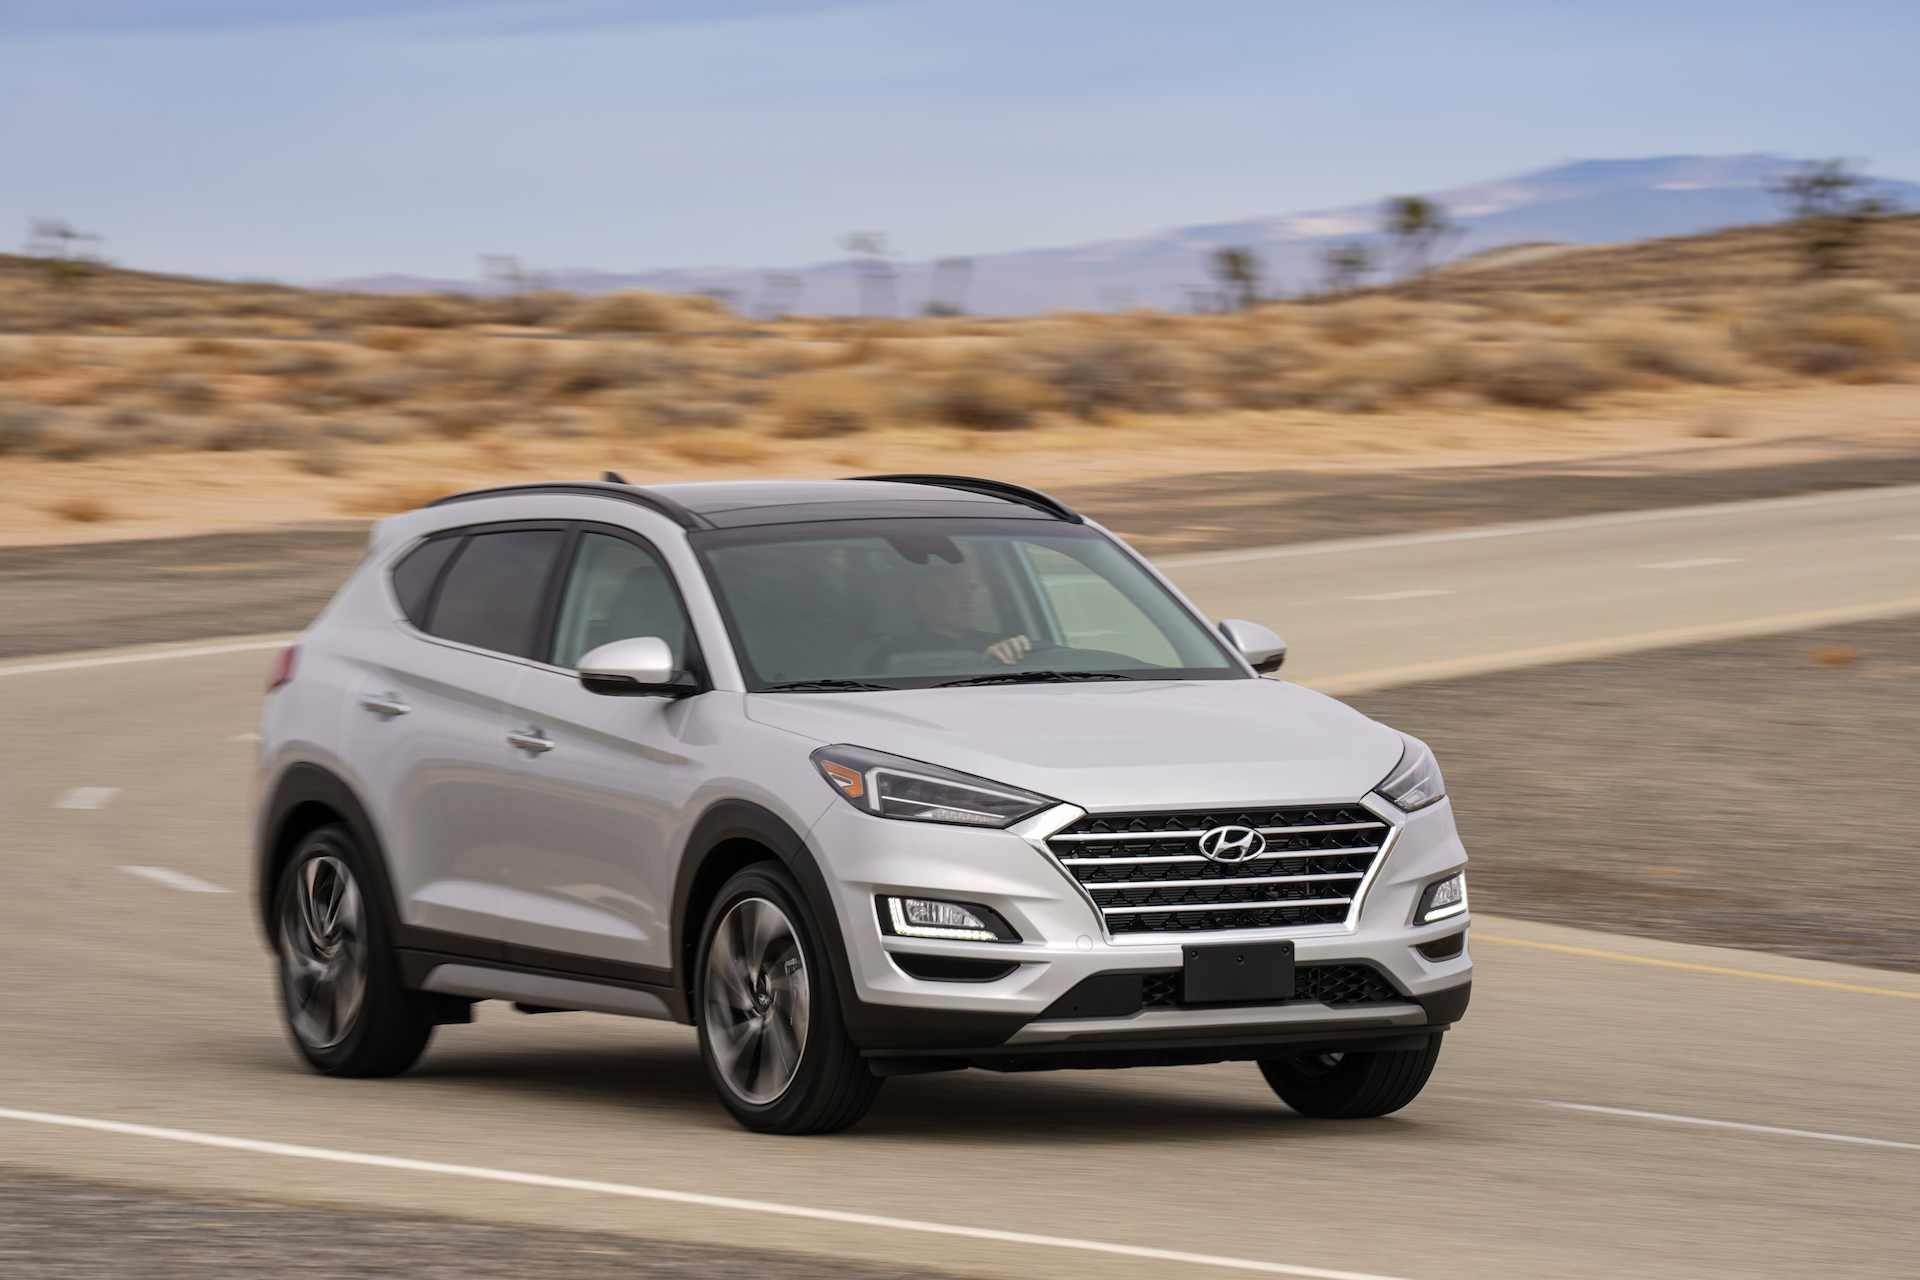 2021 Hyundai Tucson Review, Ratings, Specs, Prices, and Photos The